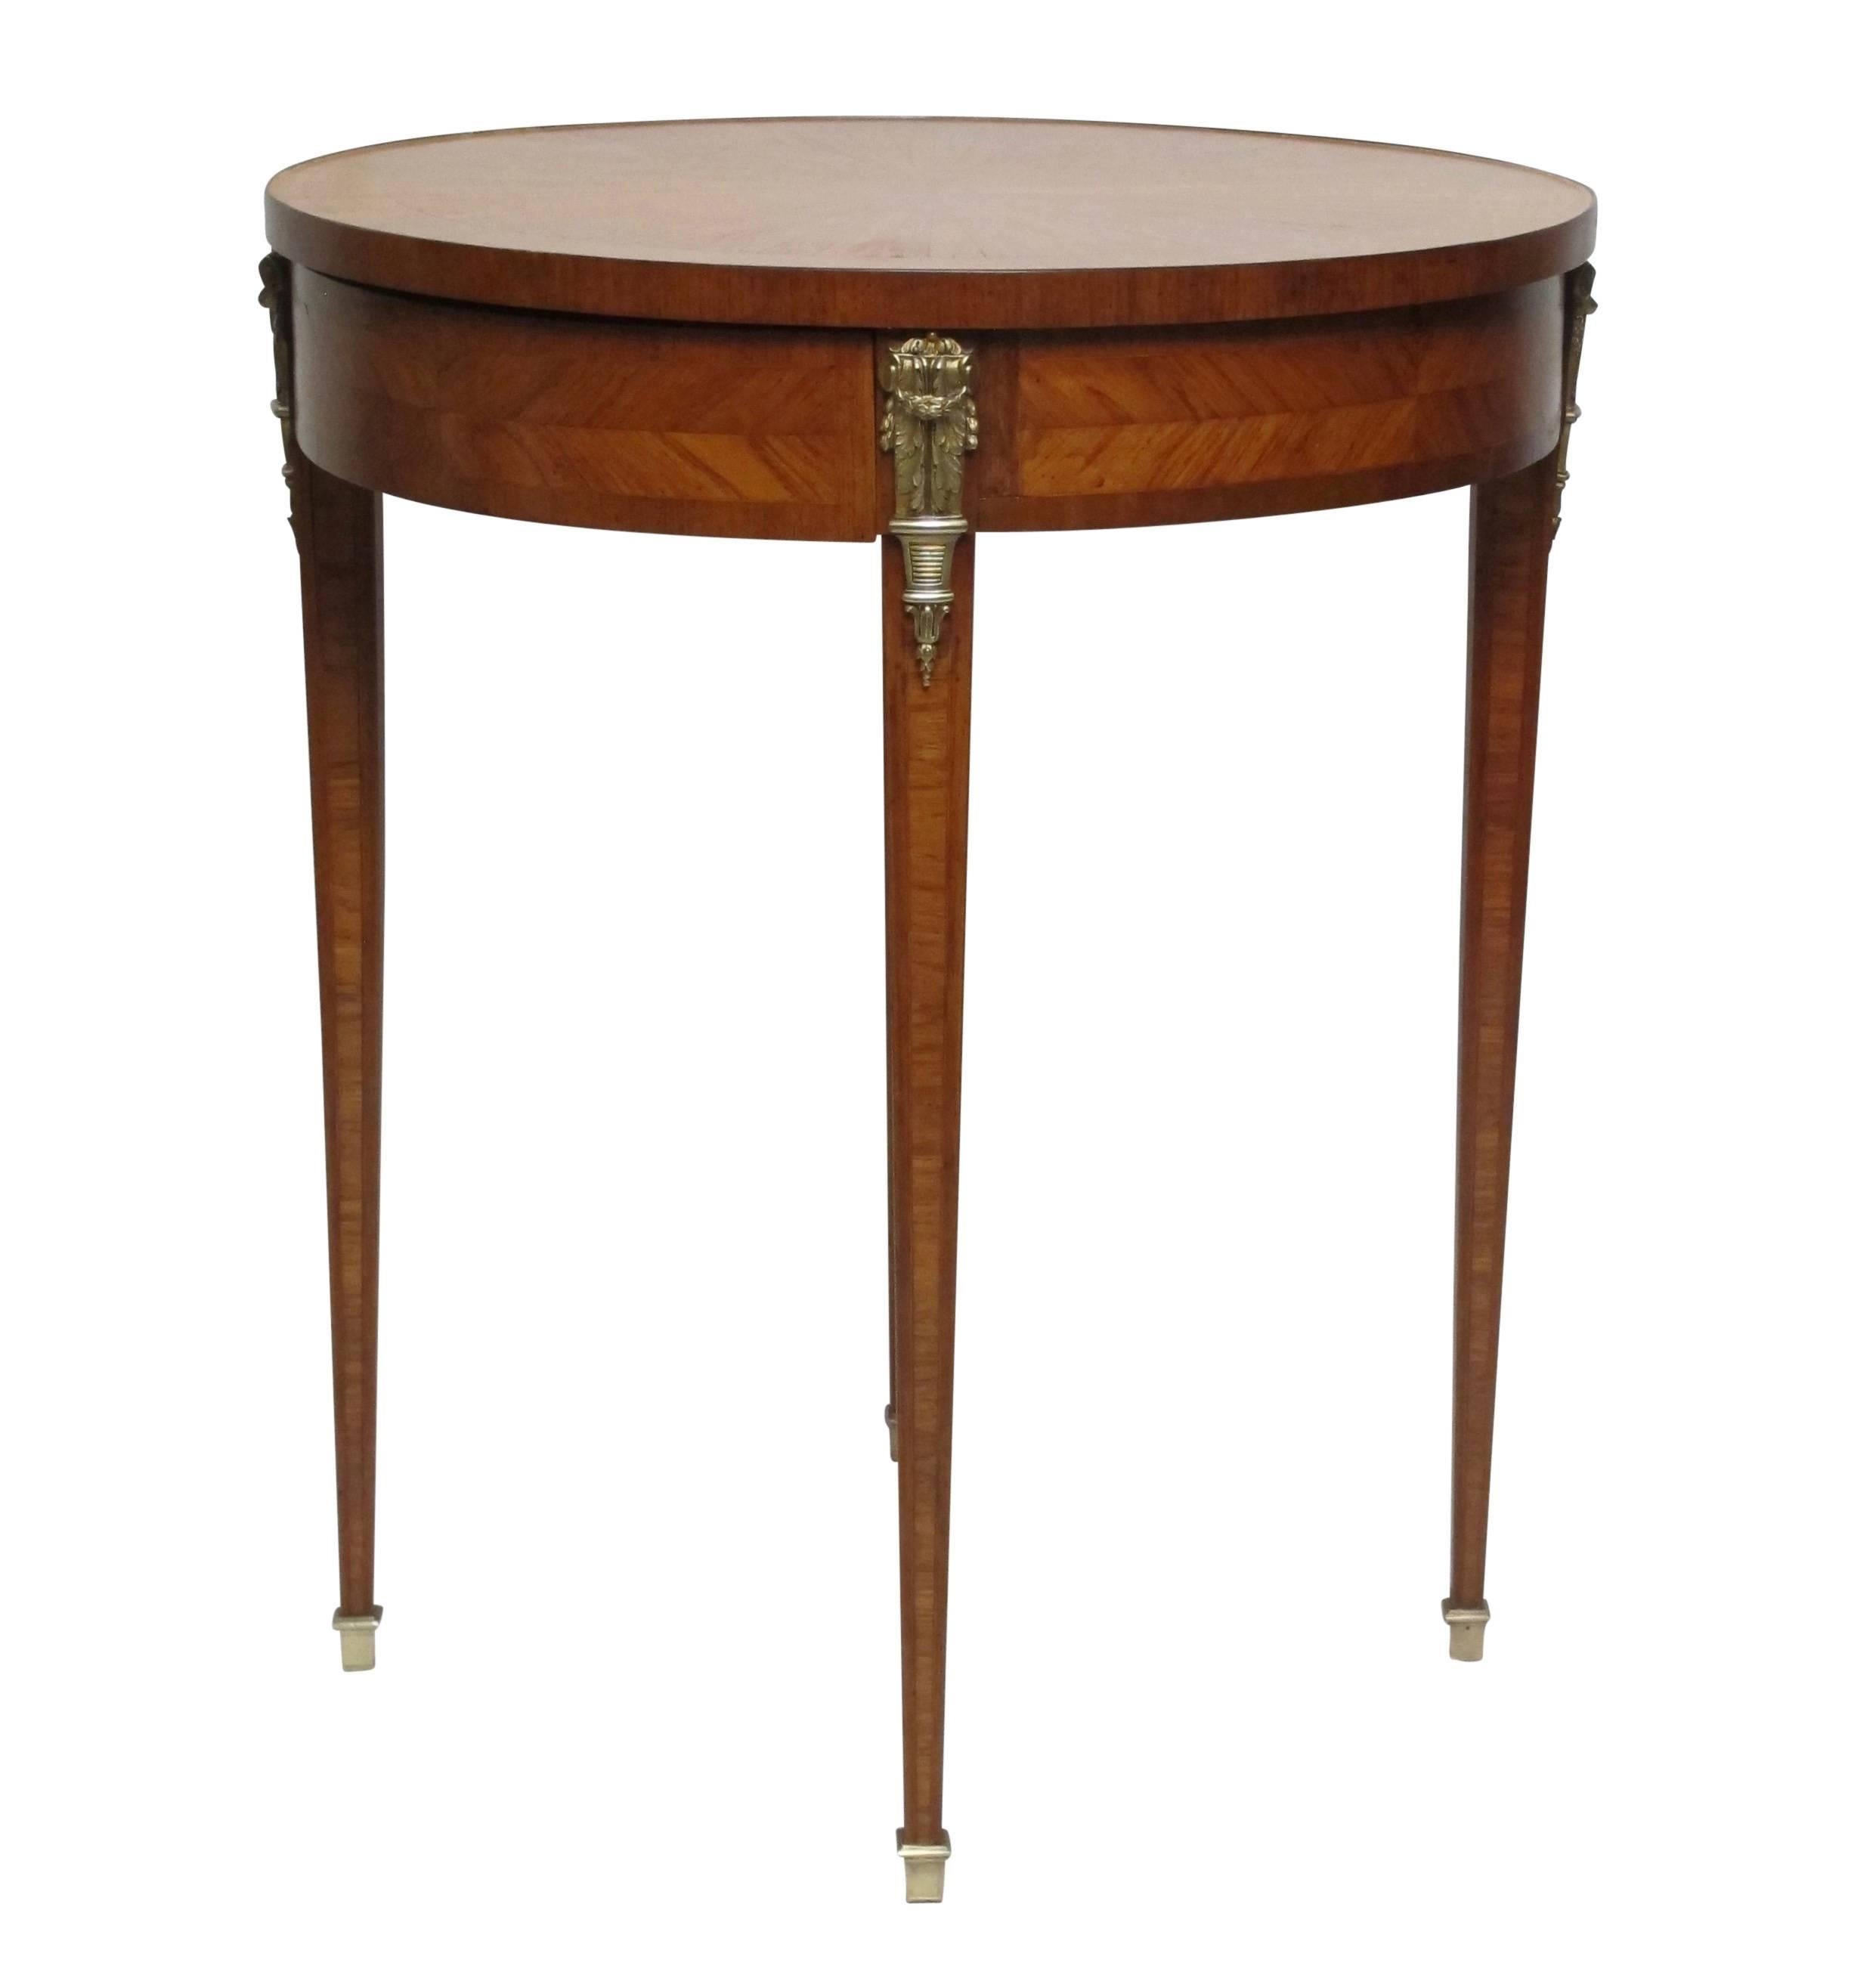 Attractive and unusual satinwood Bouillotte table having mahogany cross banding, brass mounts and sabots, France, circa 1950.